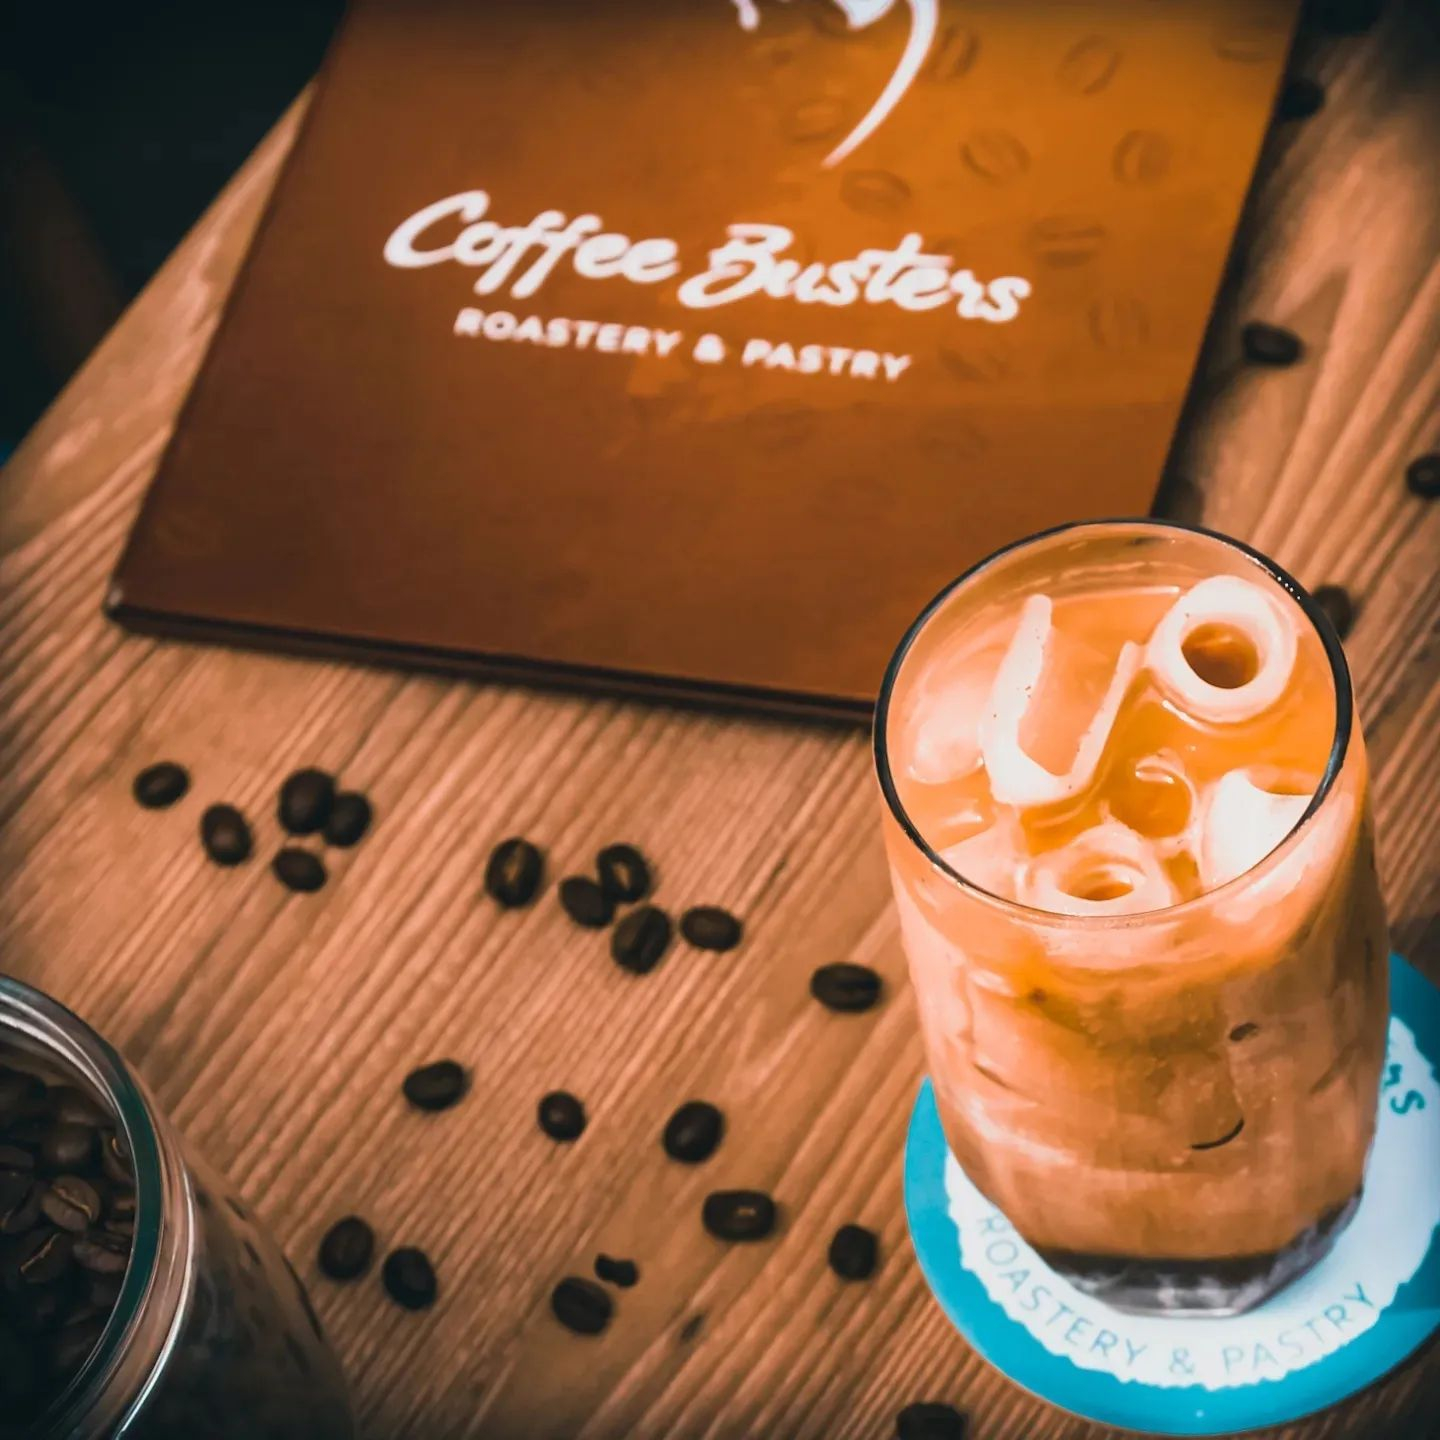 Coffee Busters Roastery & Pastry café helad